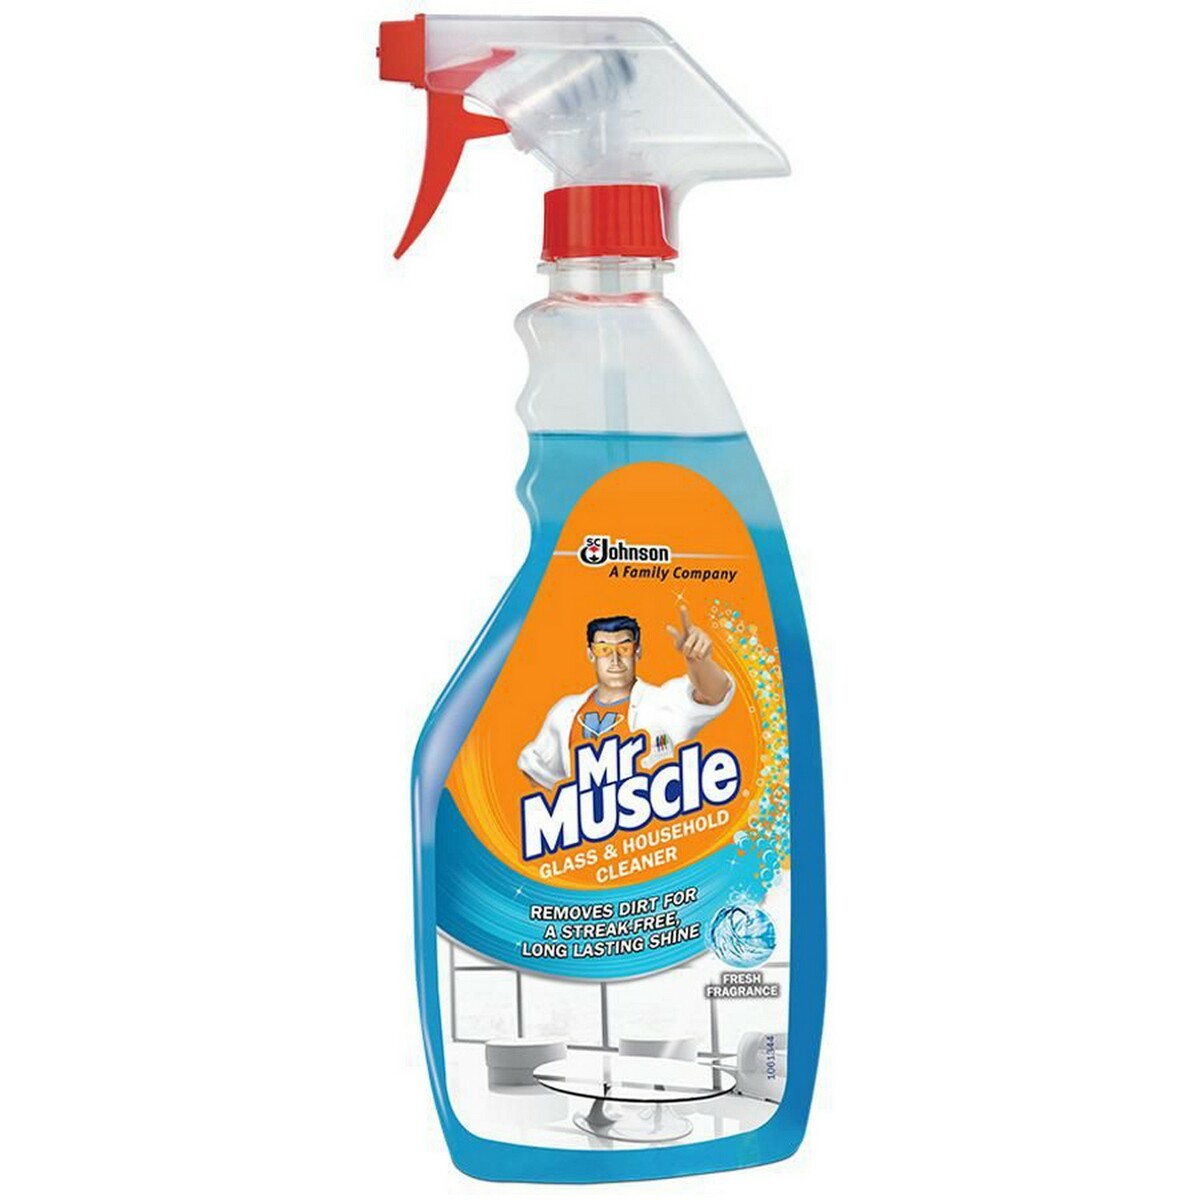 Mr.Muscle Glass & Household Cleaner 500ml